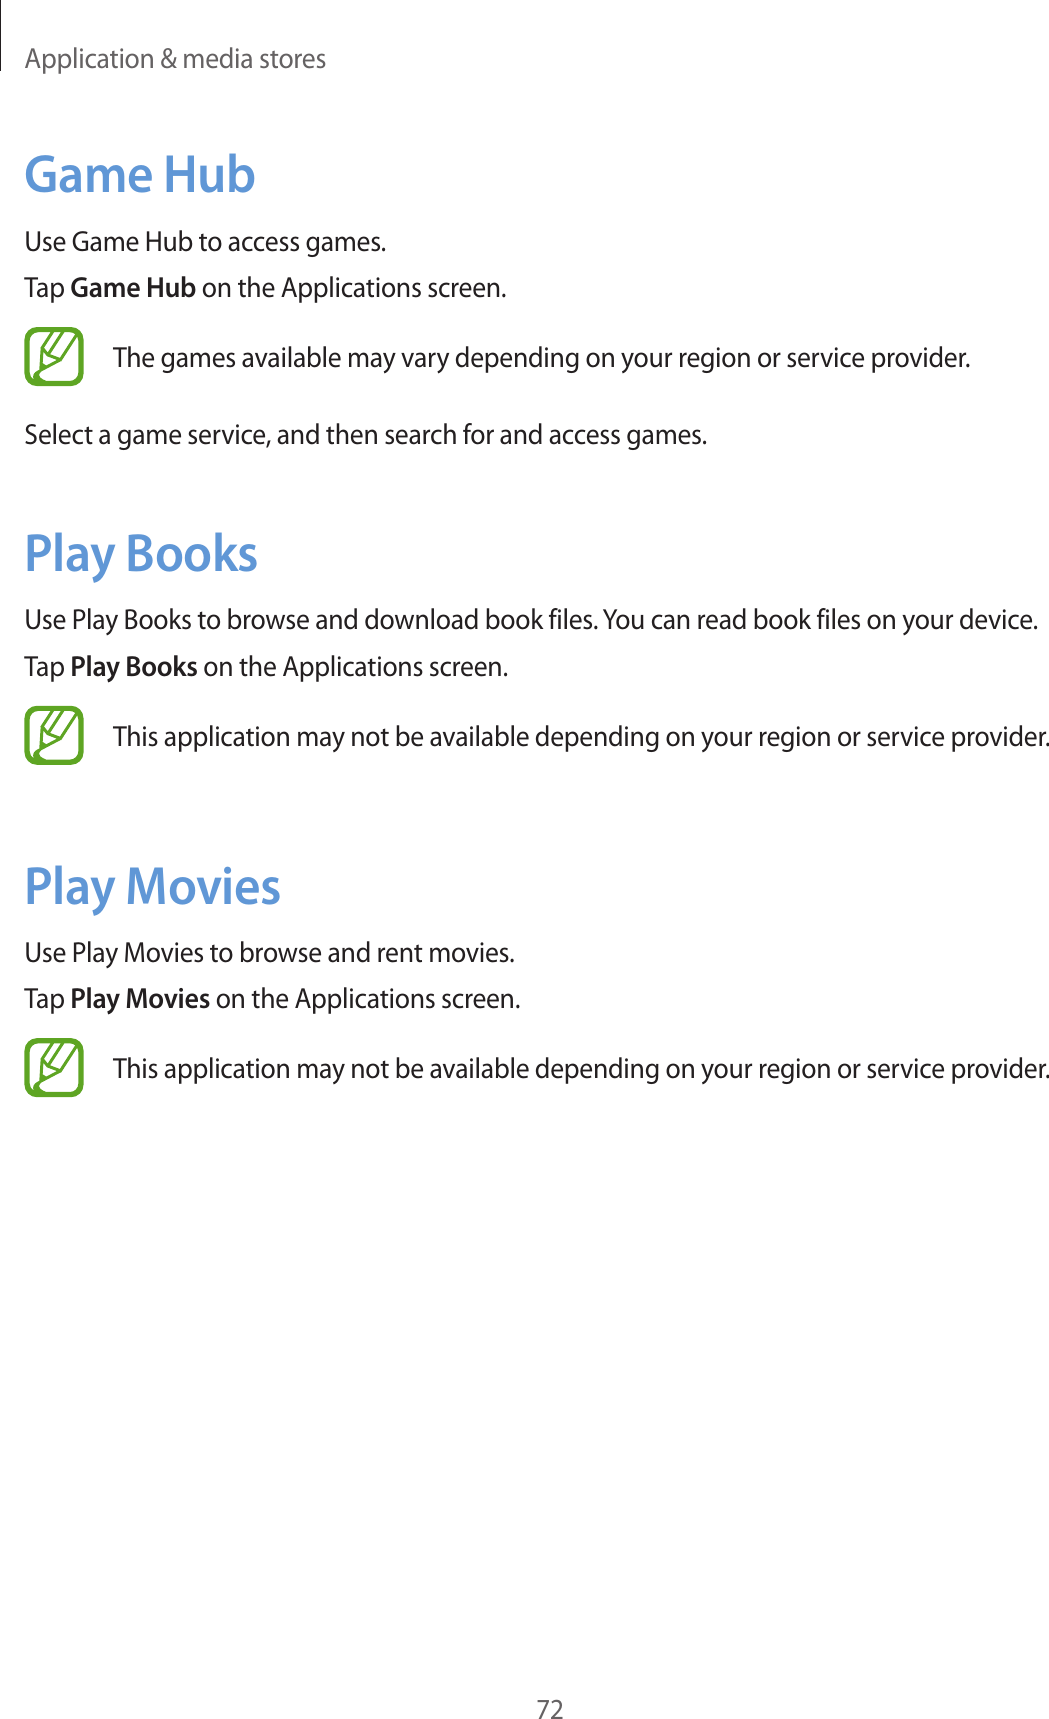 Application &amp; media stores72Game HubUse Game Hub to access games.Tap Game Hub on the Applications screen.The games available may vary depending on your region or service provider.Select a game service, and then search for and access games.Play BooksUse Play Books to browse and download book files. You can read book files on your device.Tap Play Books on the Applications screen.This application may not be available depending on your region or service provider.Play MoviesUse Play Movies to browse and rent movies.Tap Play Movies on the Applications screen.This application may not be available depending on your region or service provider.